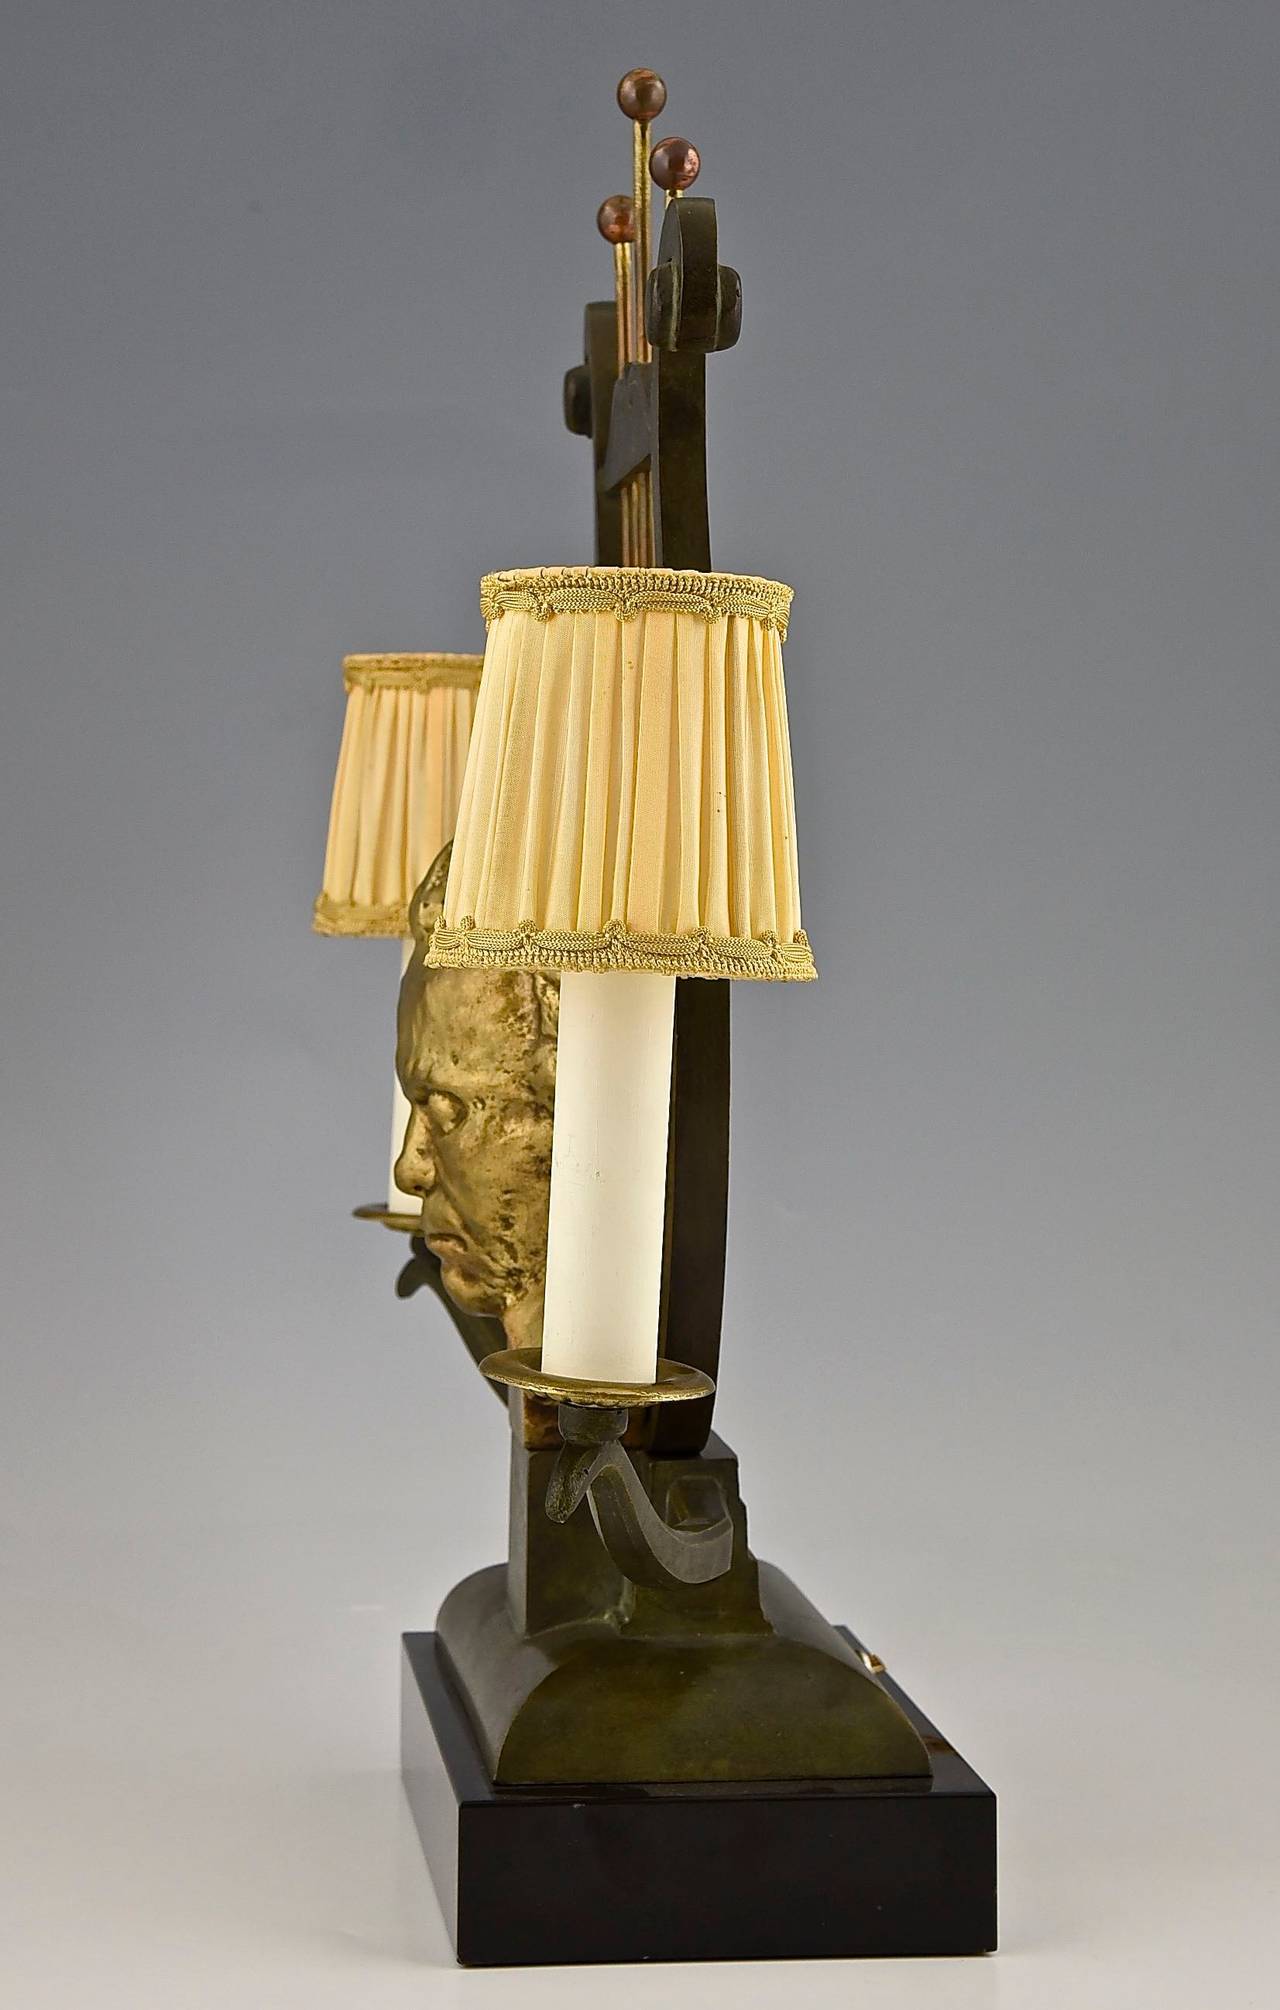 Patinated French Art Deco Bronze Lamp with Head of Beethoven by G. Garreau, 1935